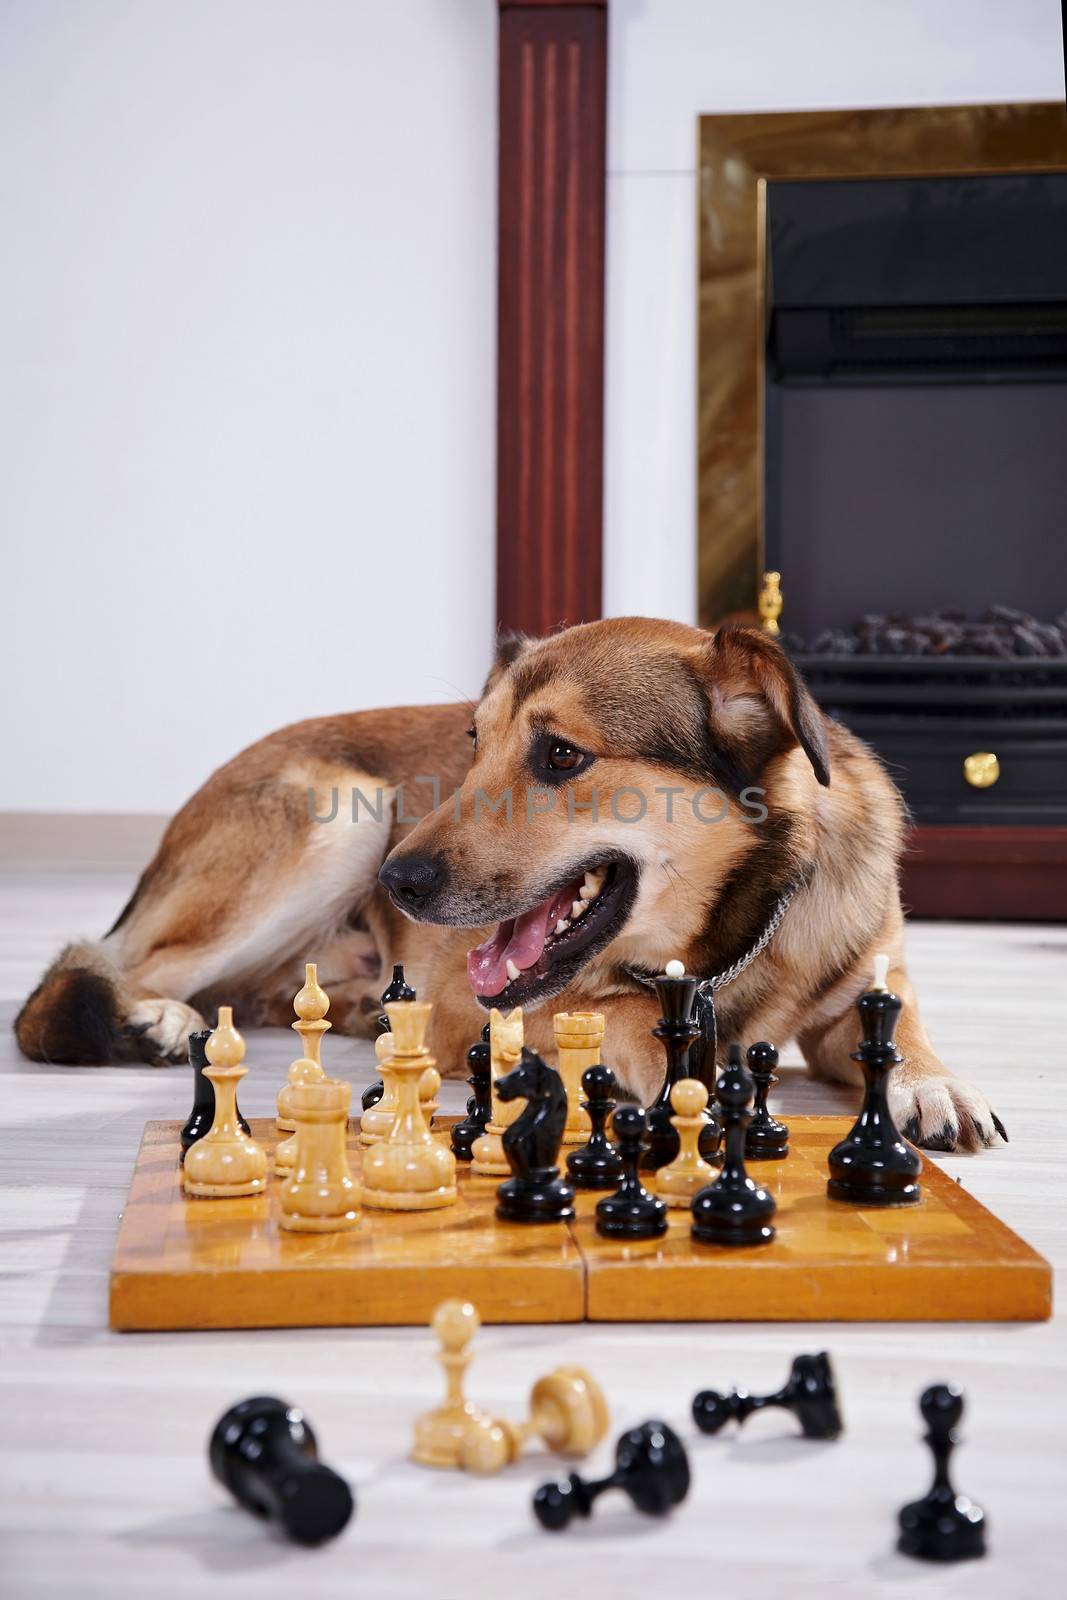 Dog and chess against a fireplace. by Azaliya